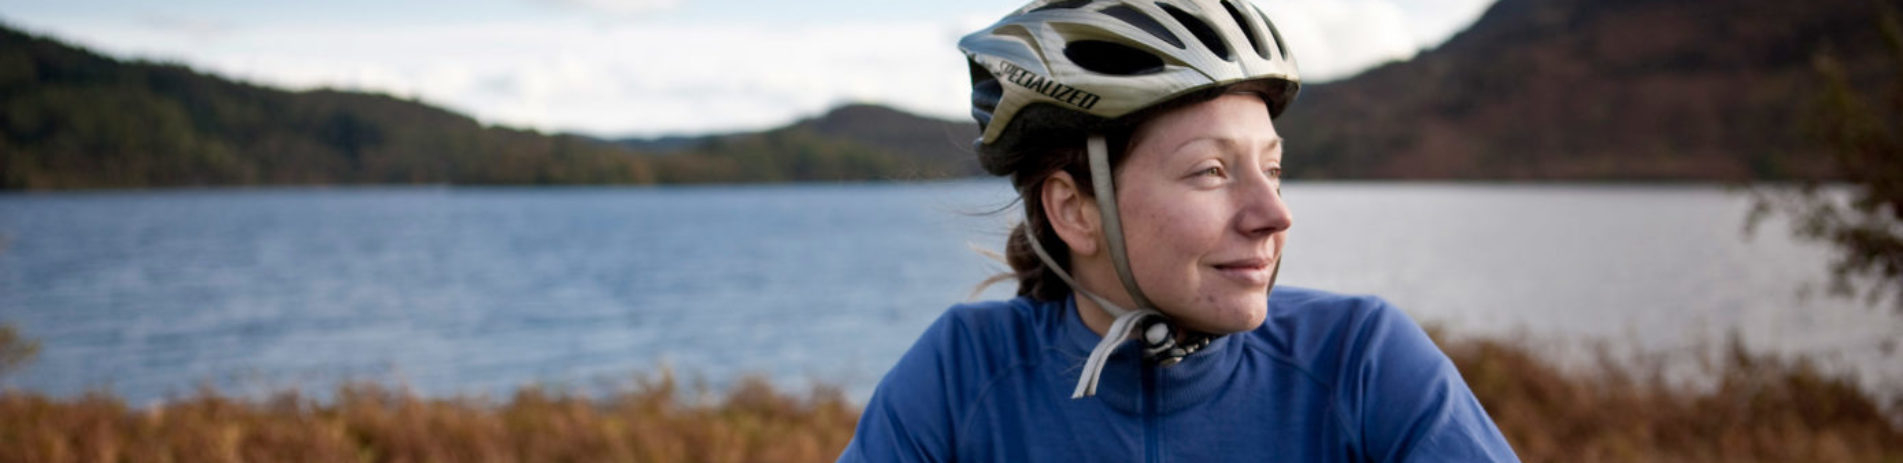 woman-in-blue-sweatshirt-and-bike-helmet-on-smiling-and-looking-in-the-distance-with-loch-and-hills-in-the-background